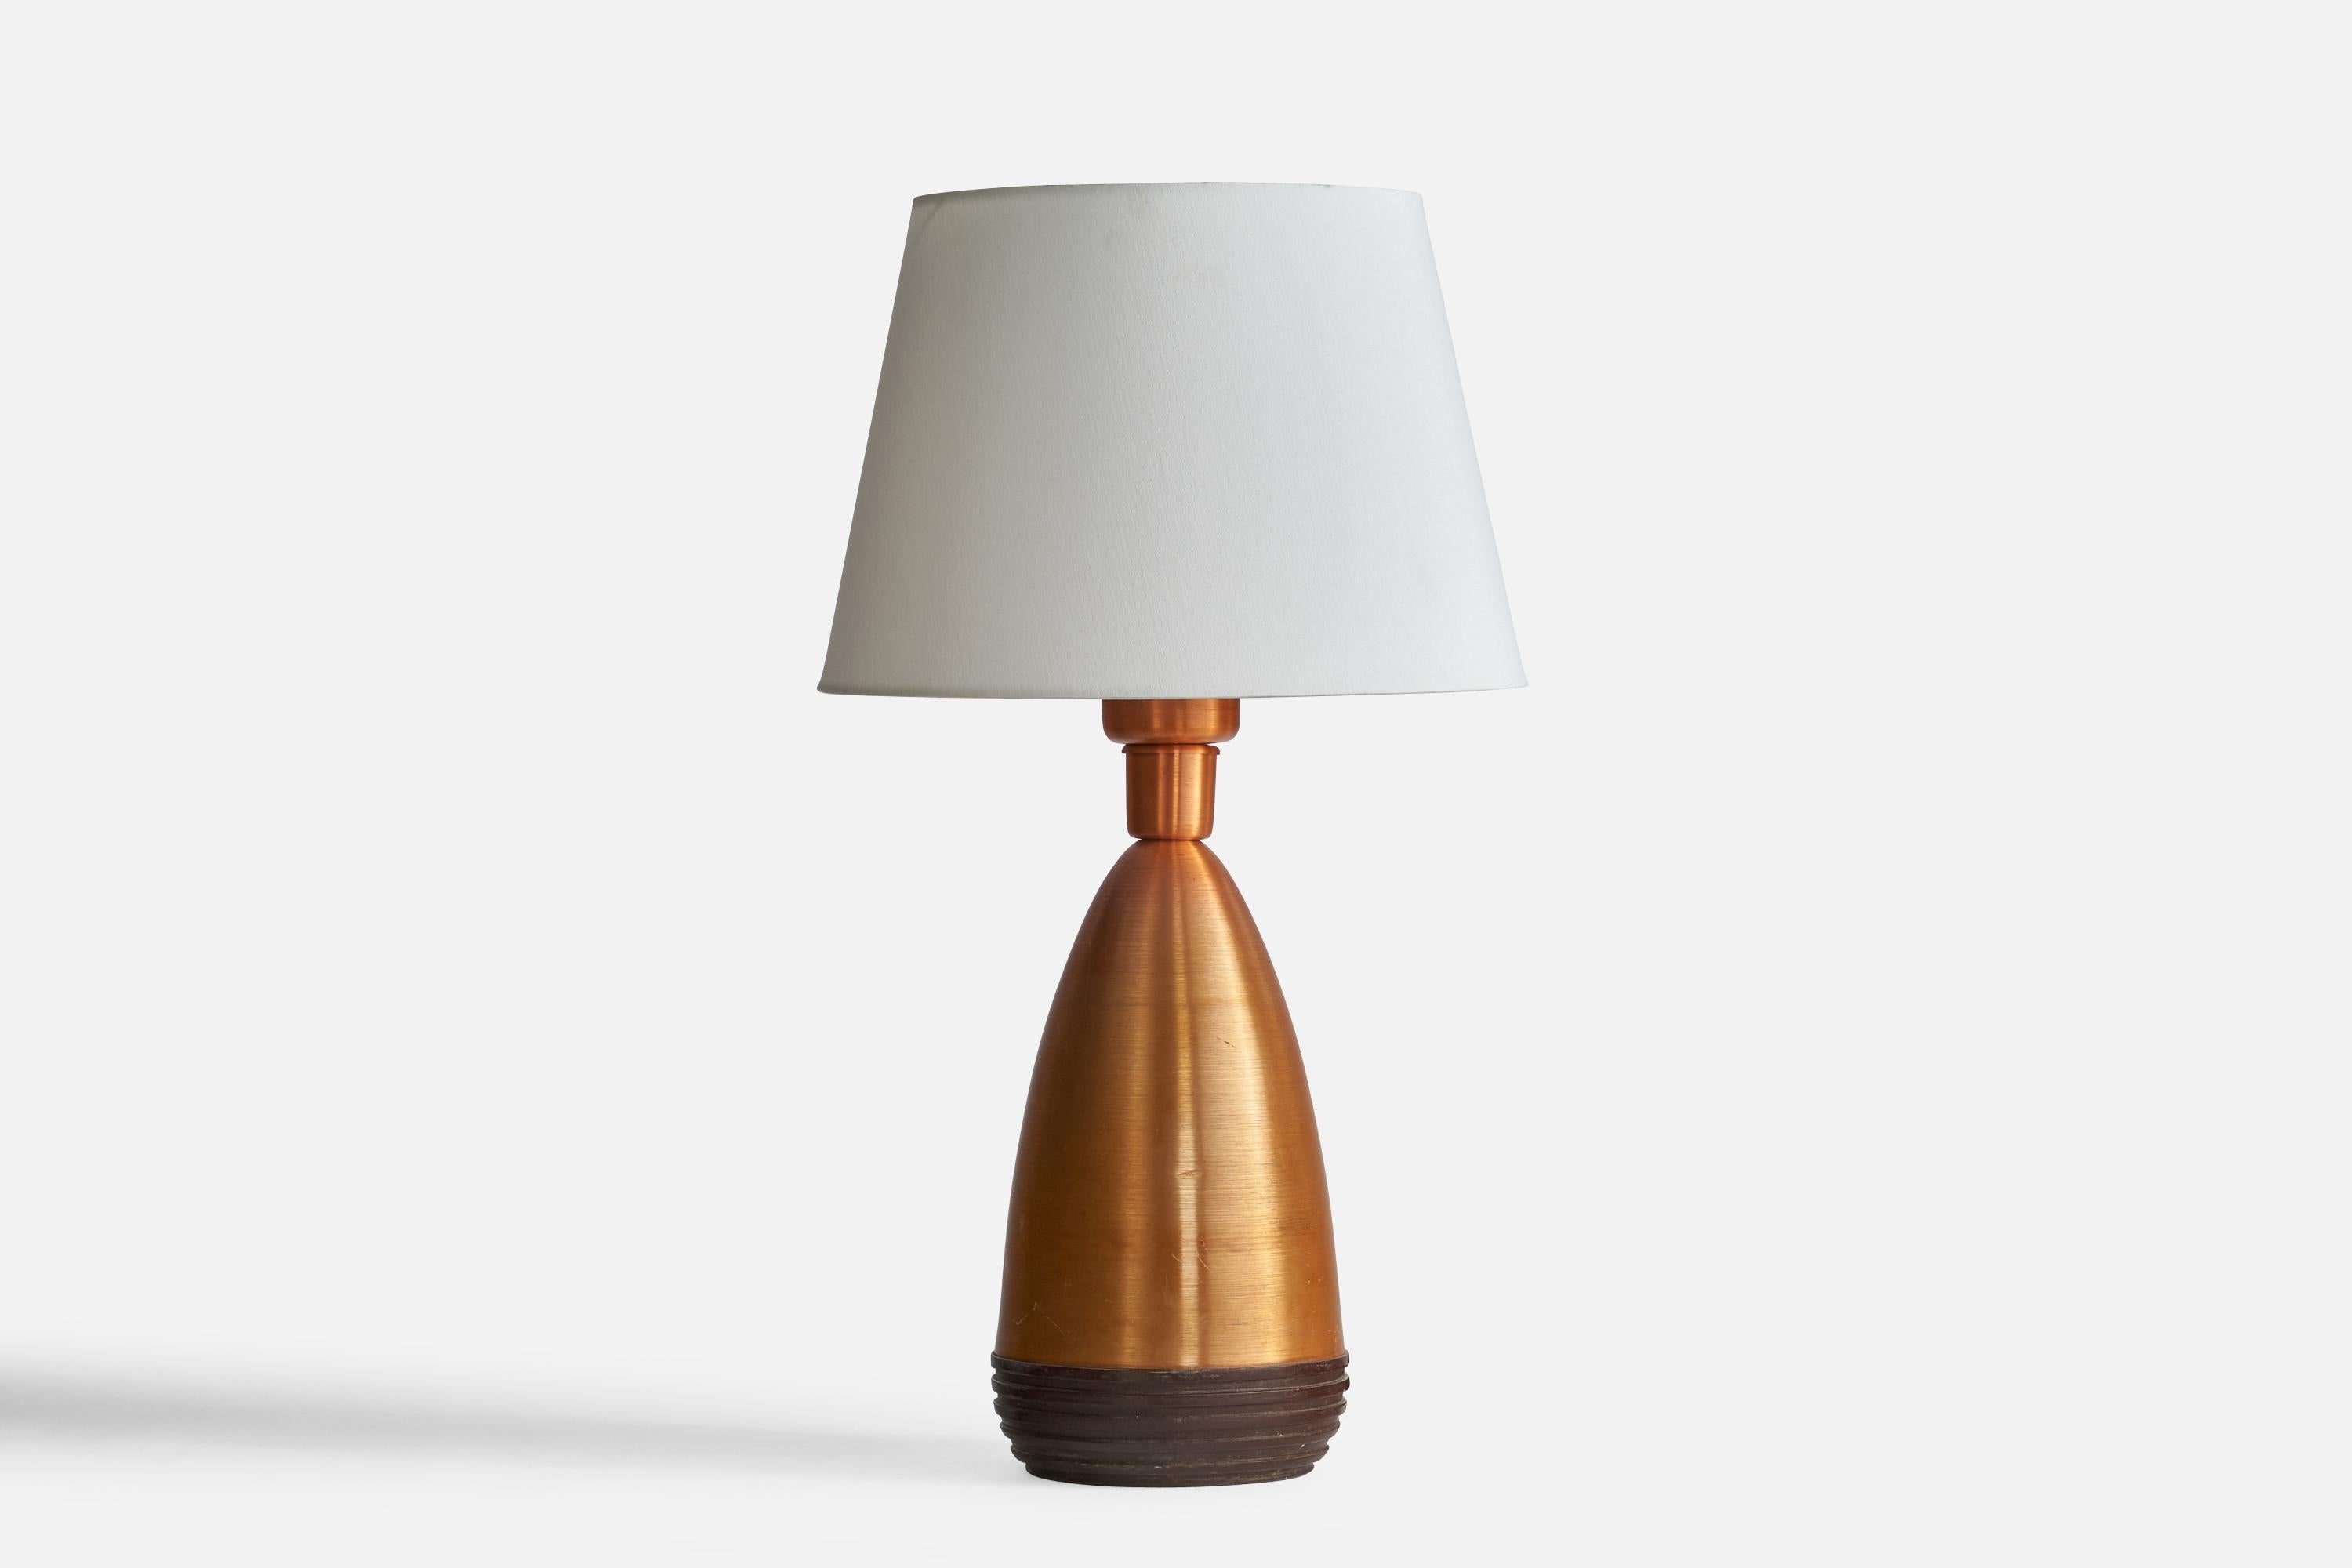 A copper and brown-painted wood table lamp designed and produced in the US, c. 1950s.

Dimensions of Lamp (inches): 19.75” H x 6.75” Diameter
Dimensions of Shade (inches): 10” Top Diameter x 14” Bottom Diameter x 10” H
Dimensions of Lamp with Shade